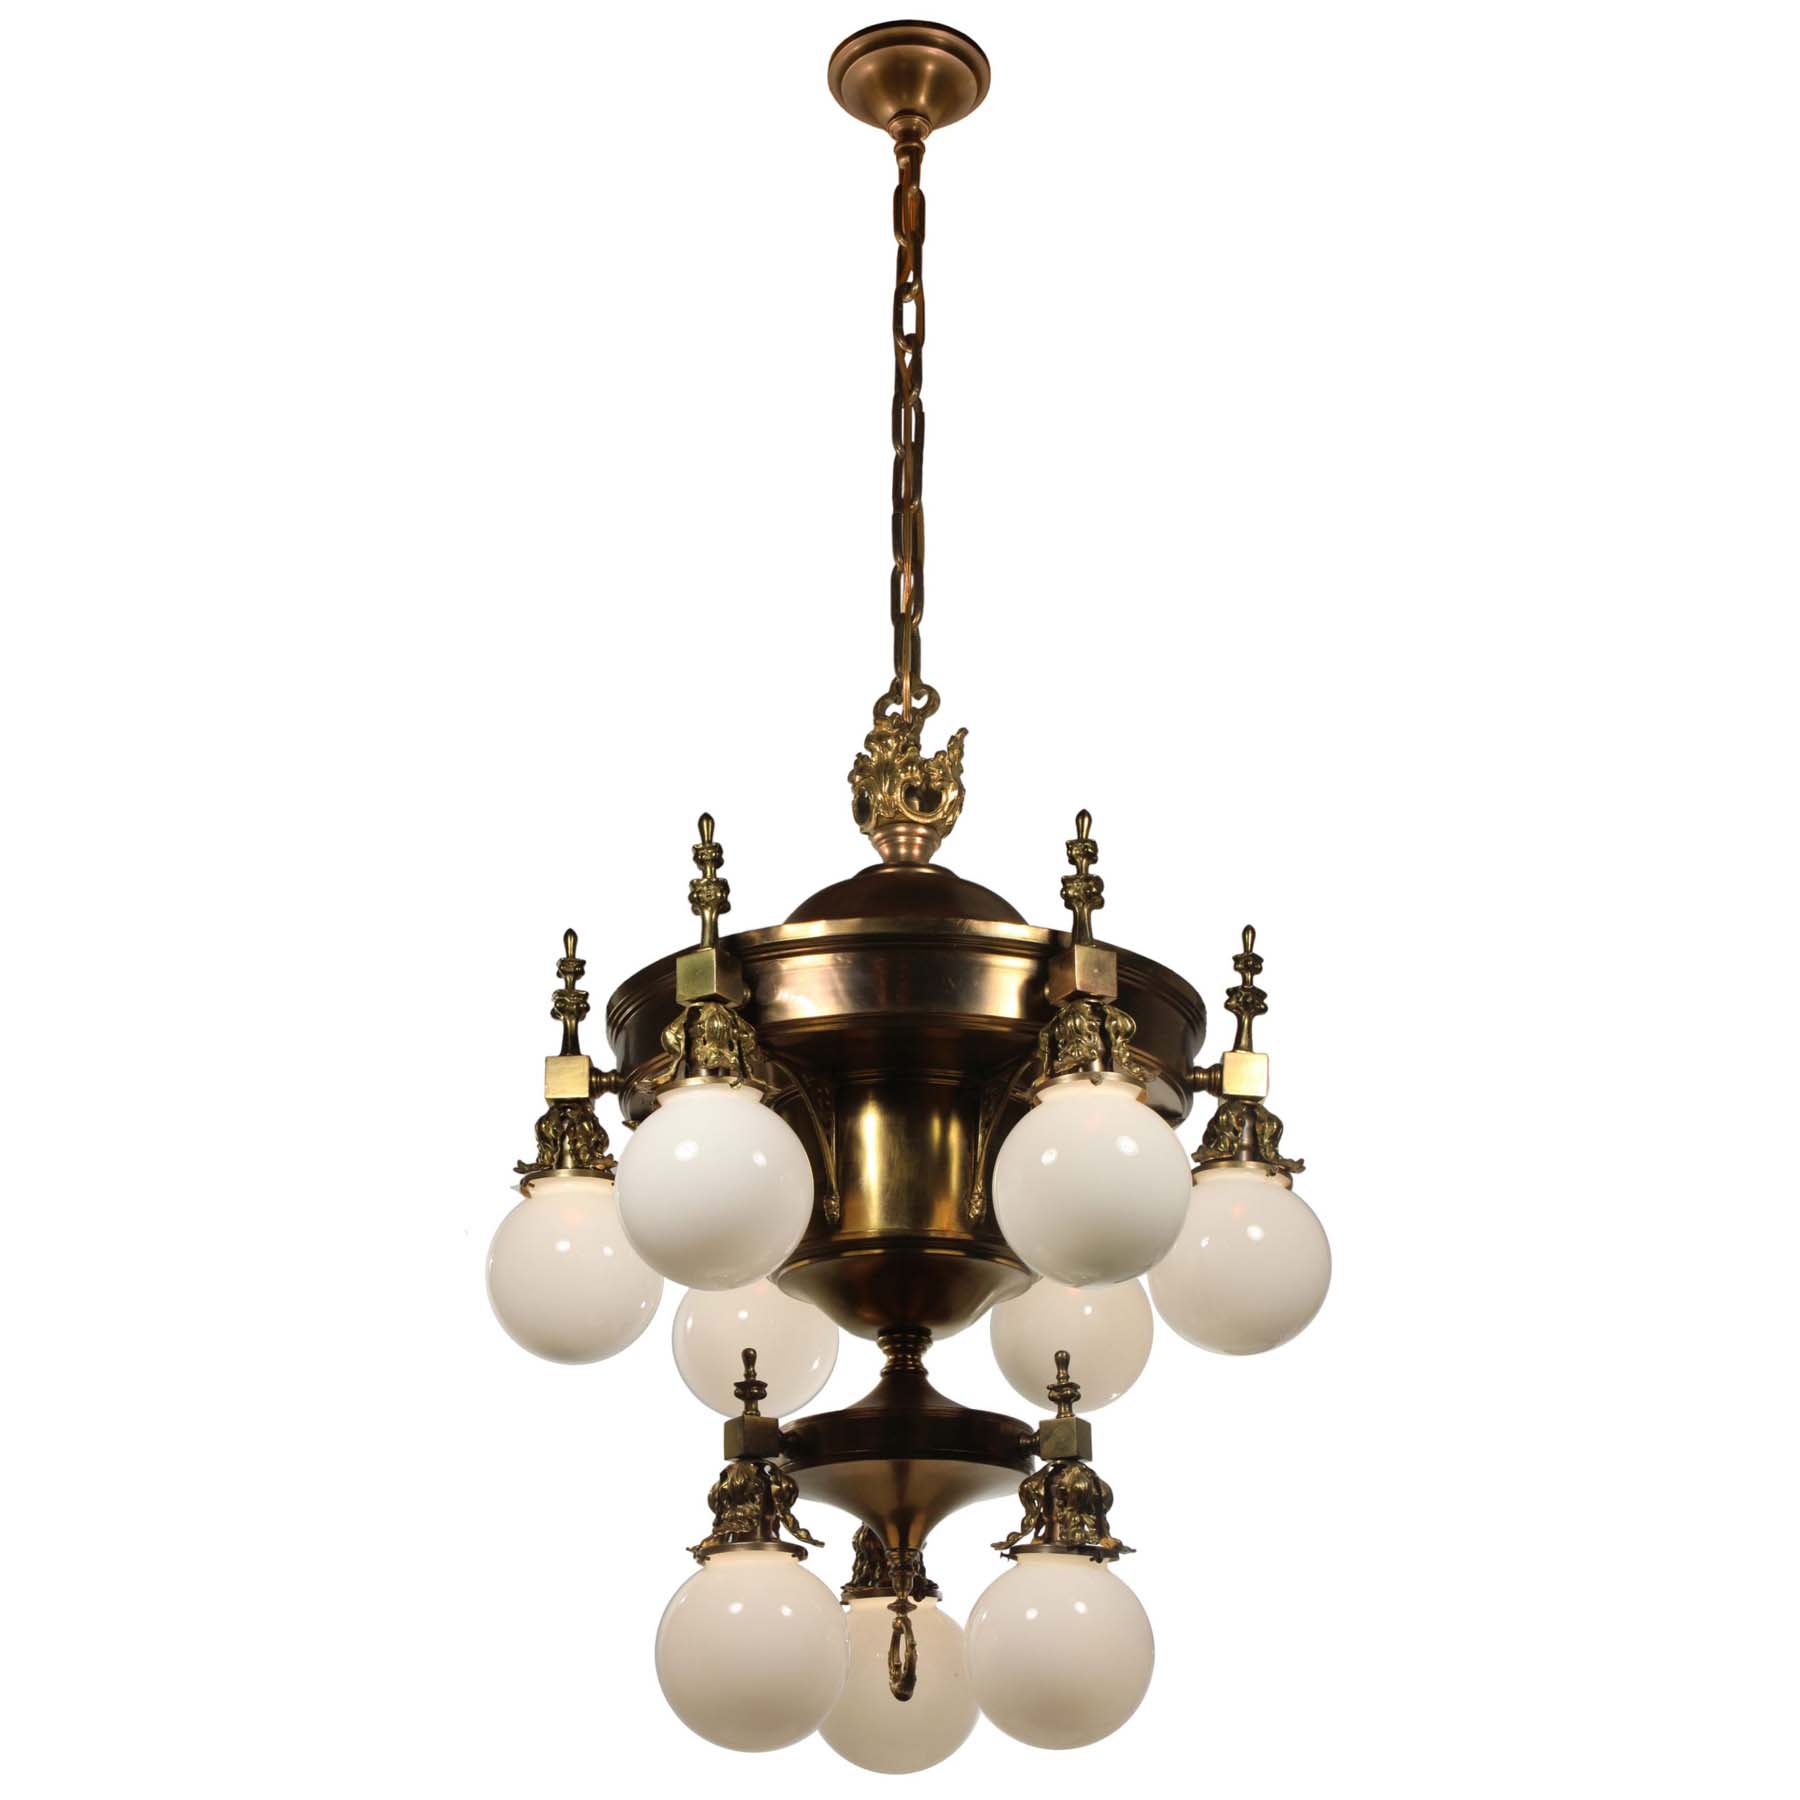 SOLD Substantial Antique Brass Chandelier with Ball Shades-67599